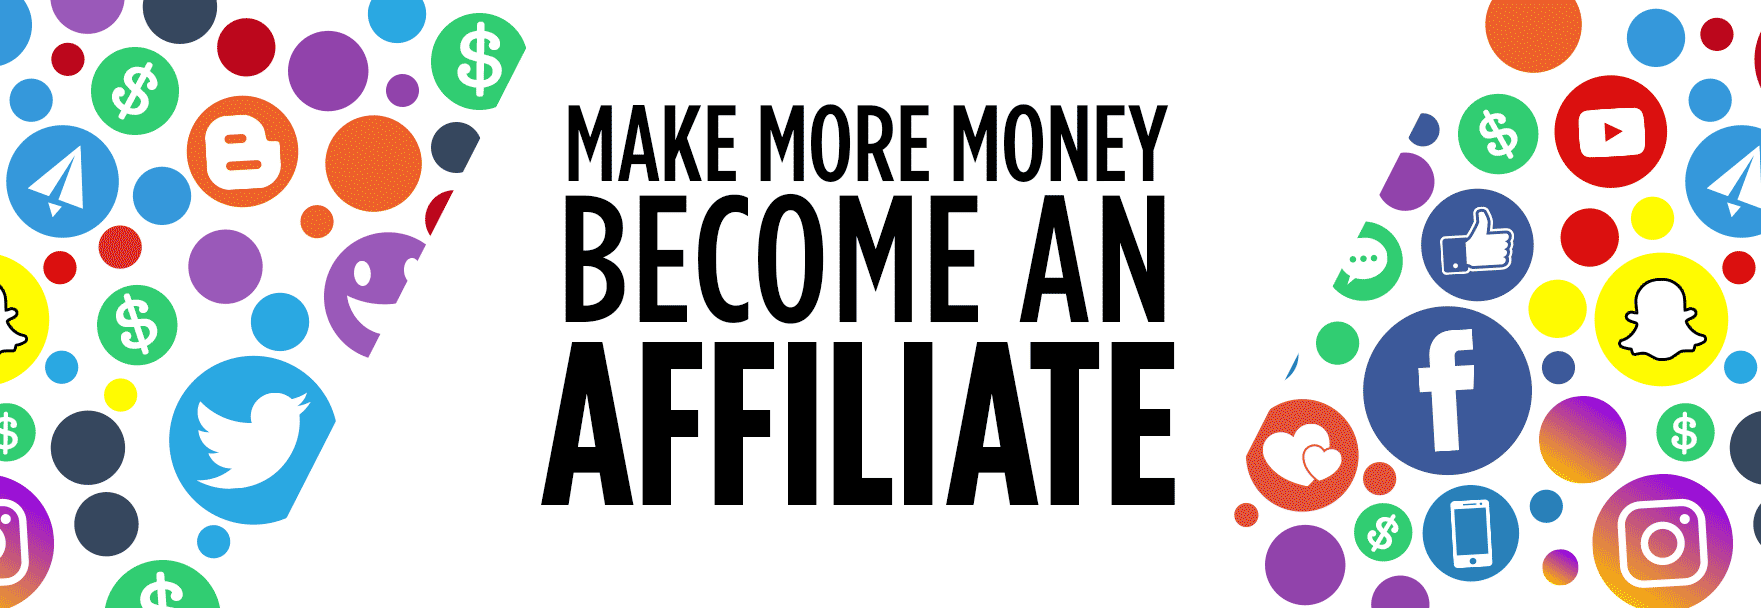 How to become an Amazon affiliate marketer? for beginners - LEAD